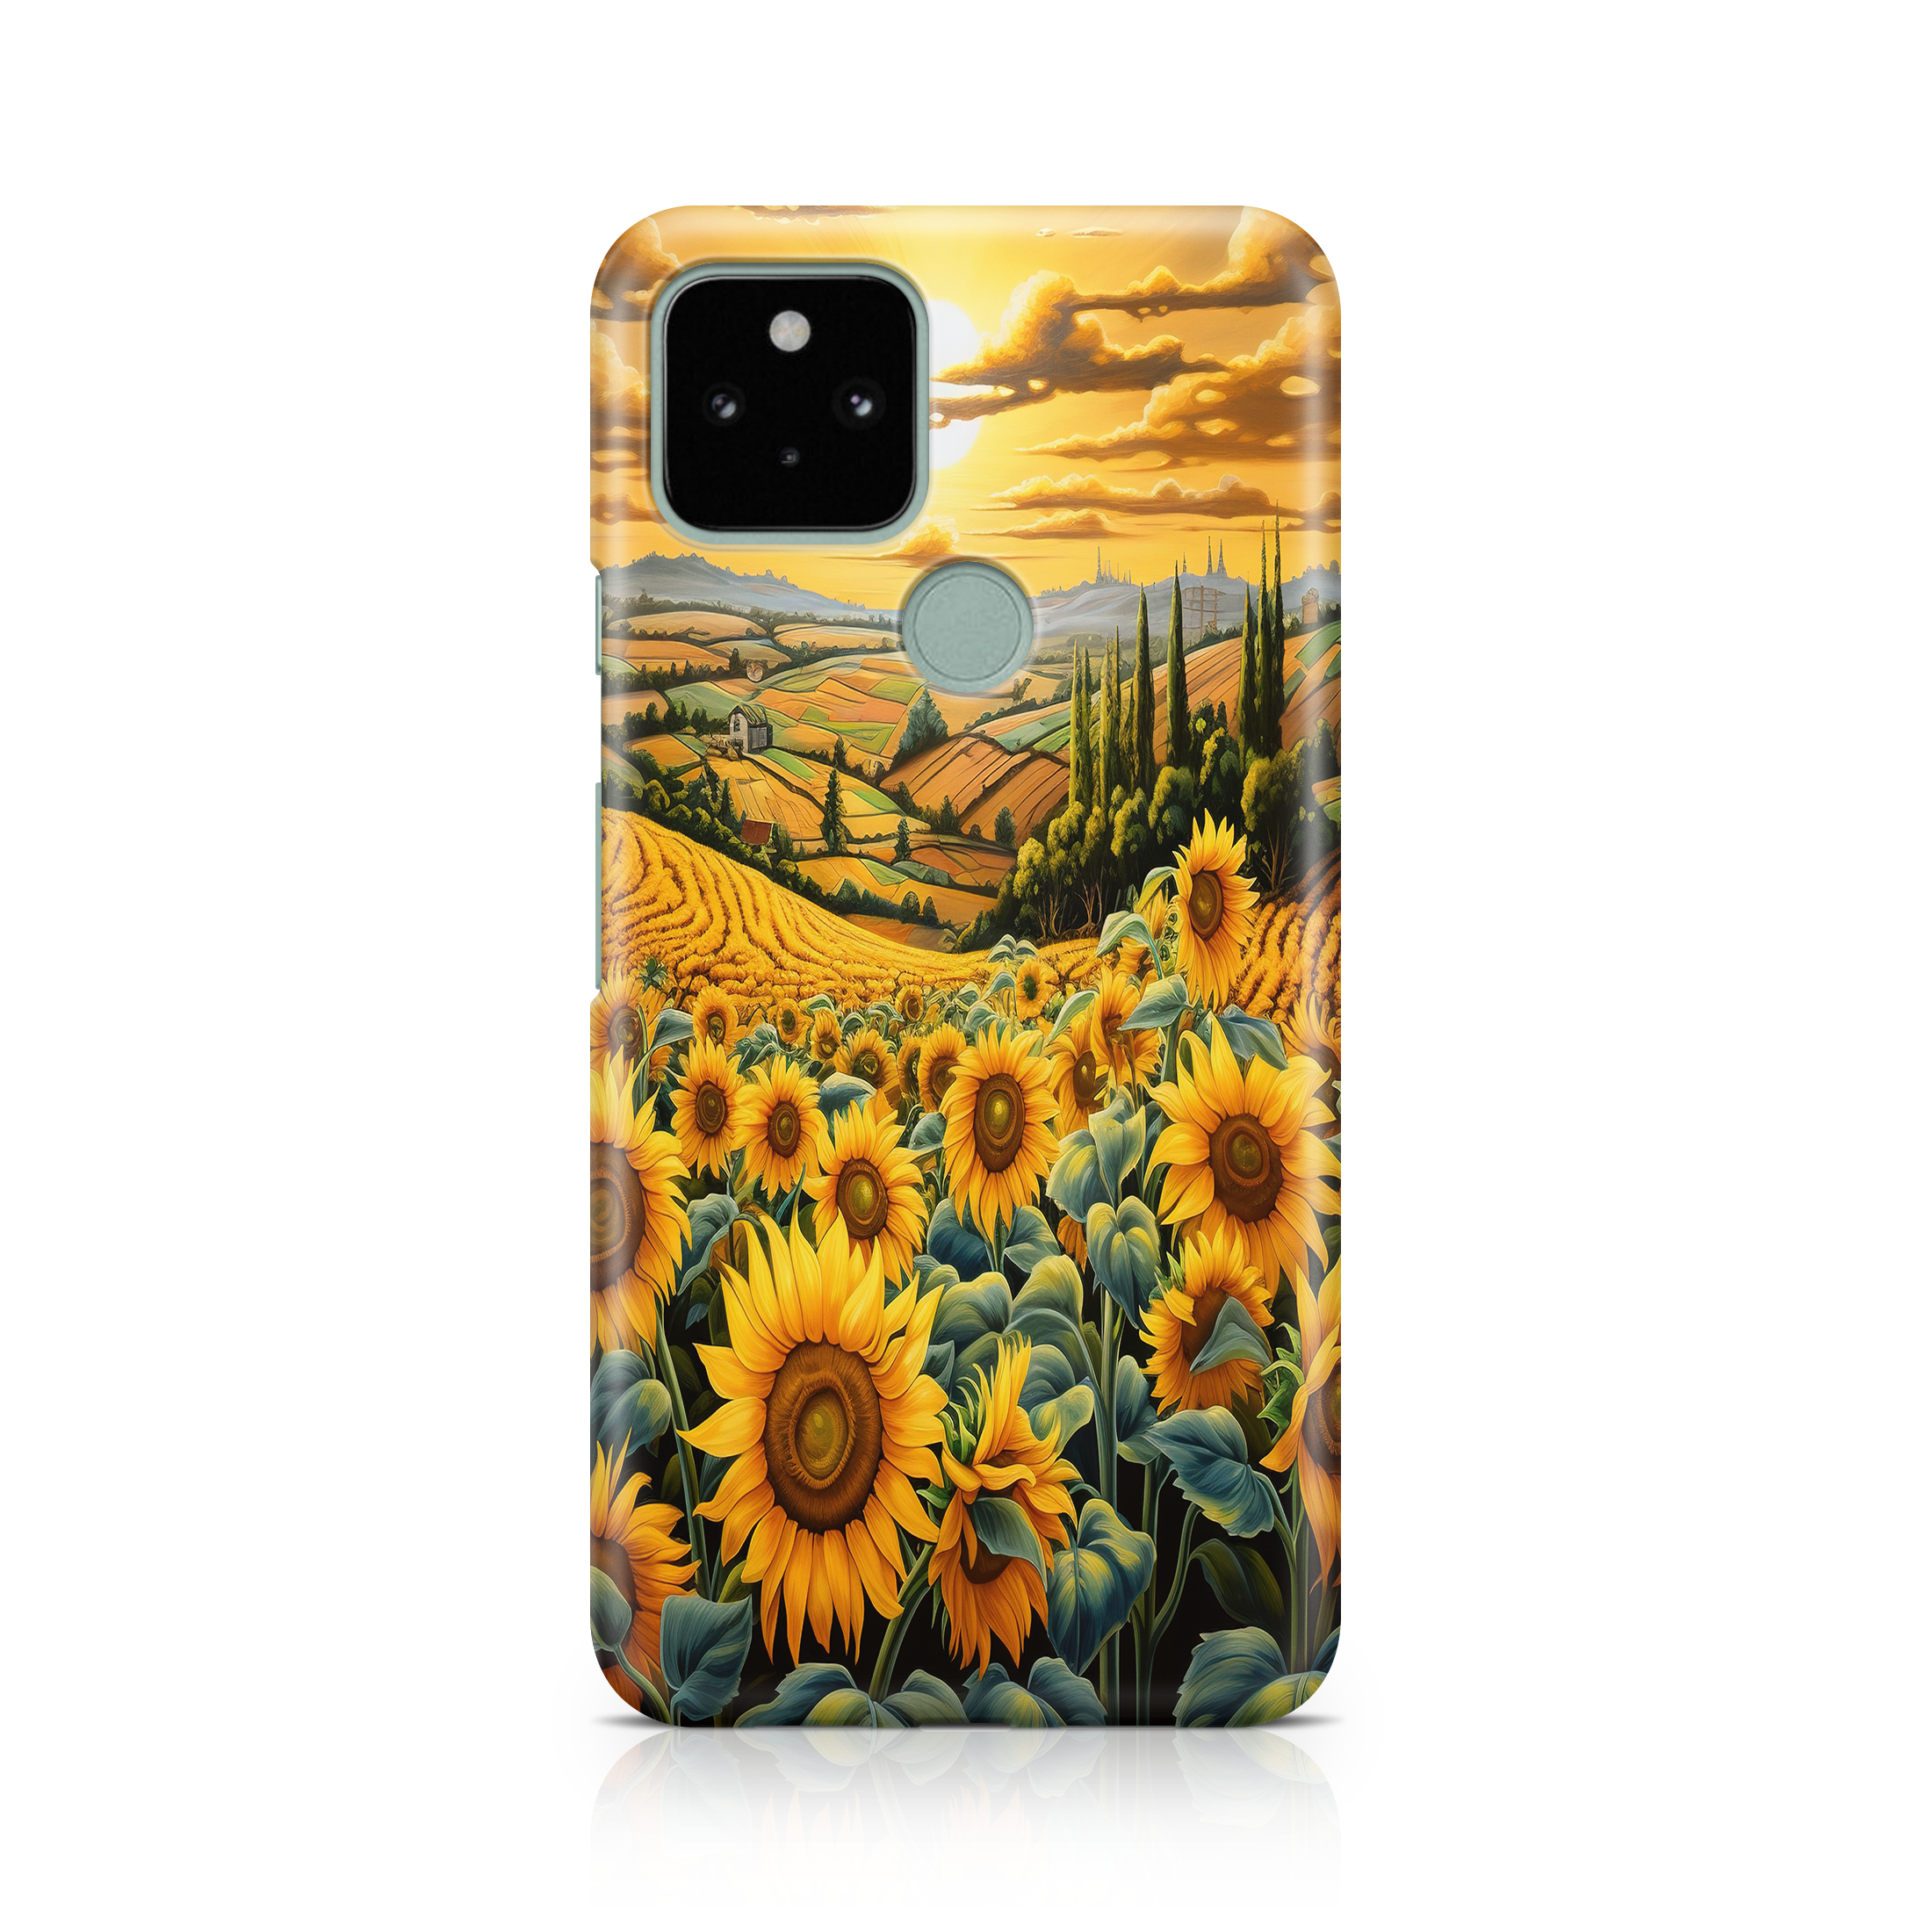 Sunflower Fields - Google phone case designs by CaseSwagger